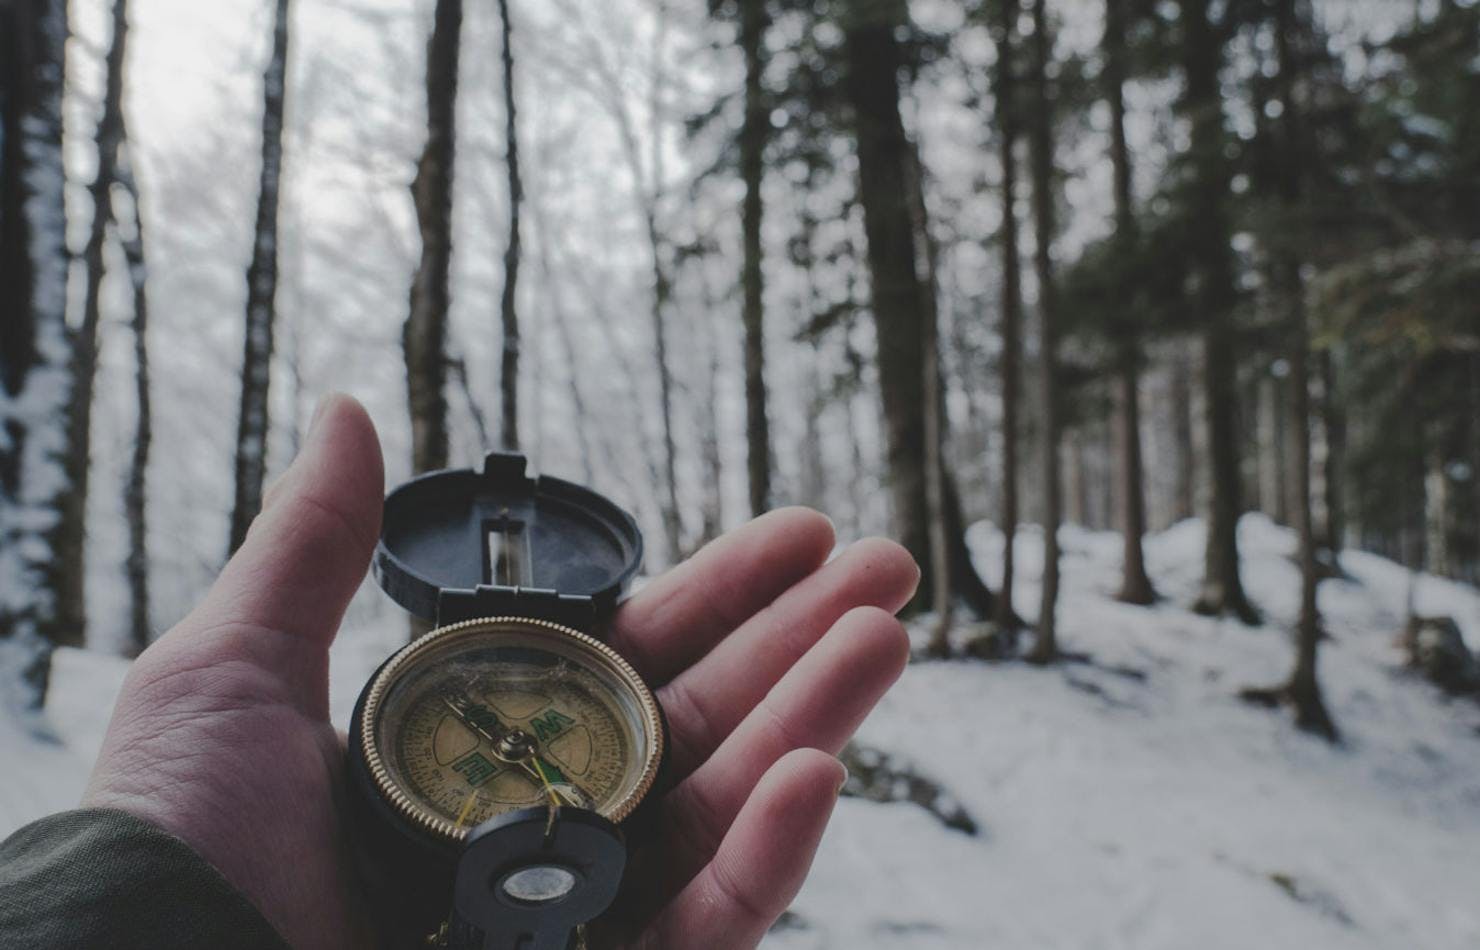 A compass in the hand